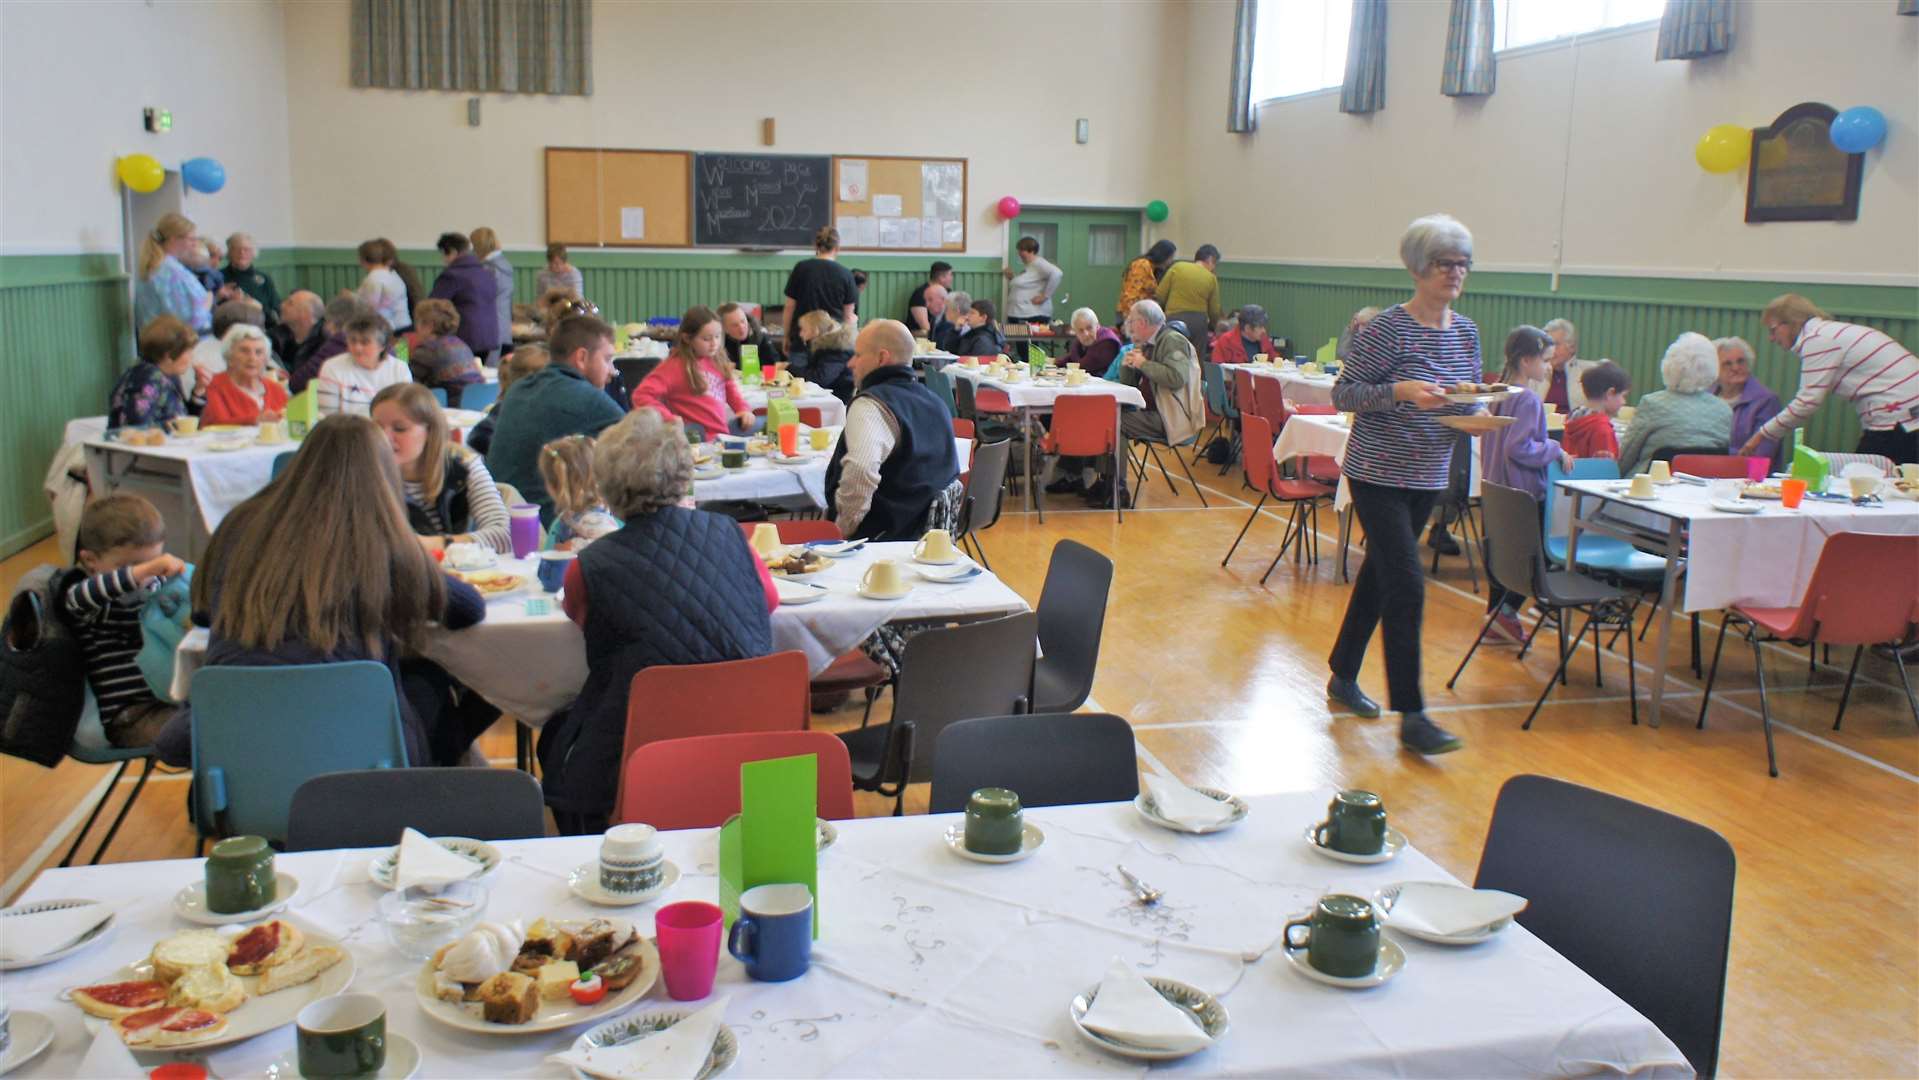 A steady stream of visitors attended Saturday morning's Macmillan coffee morning event in Watten Village Hall. Picture: DGS